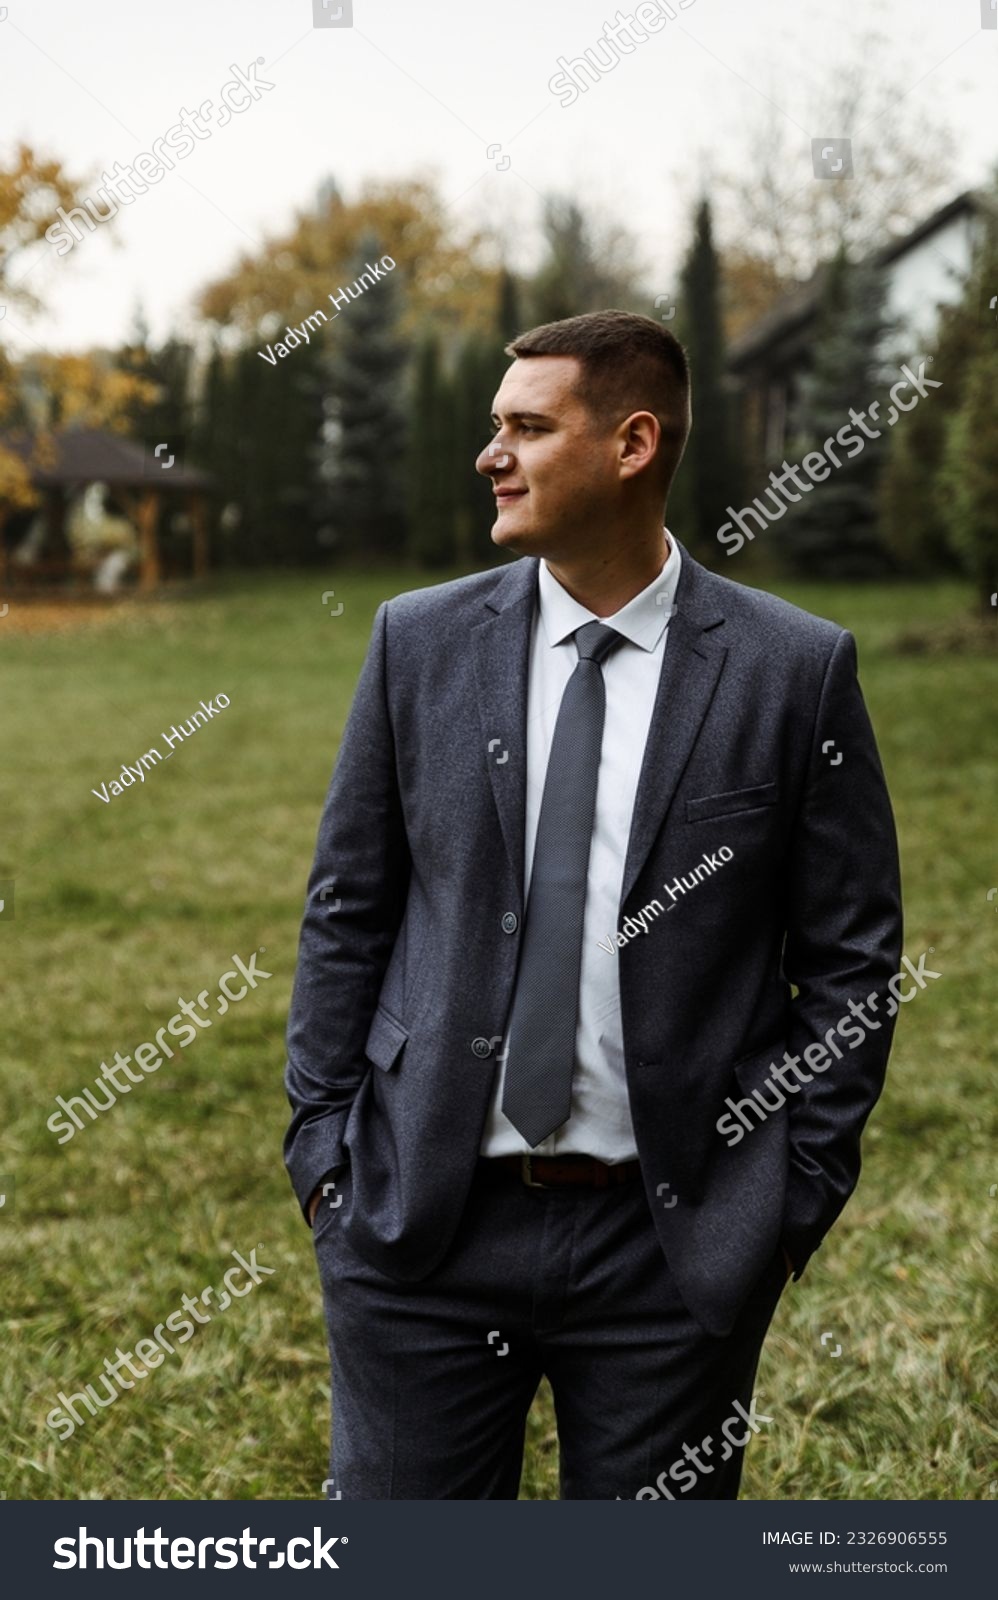 portrait of the groom outside in the autumn season.stylish tall groom in a blue suit.businessman in nature. portrait of a successful man #2326906555